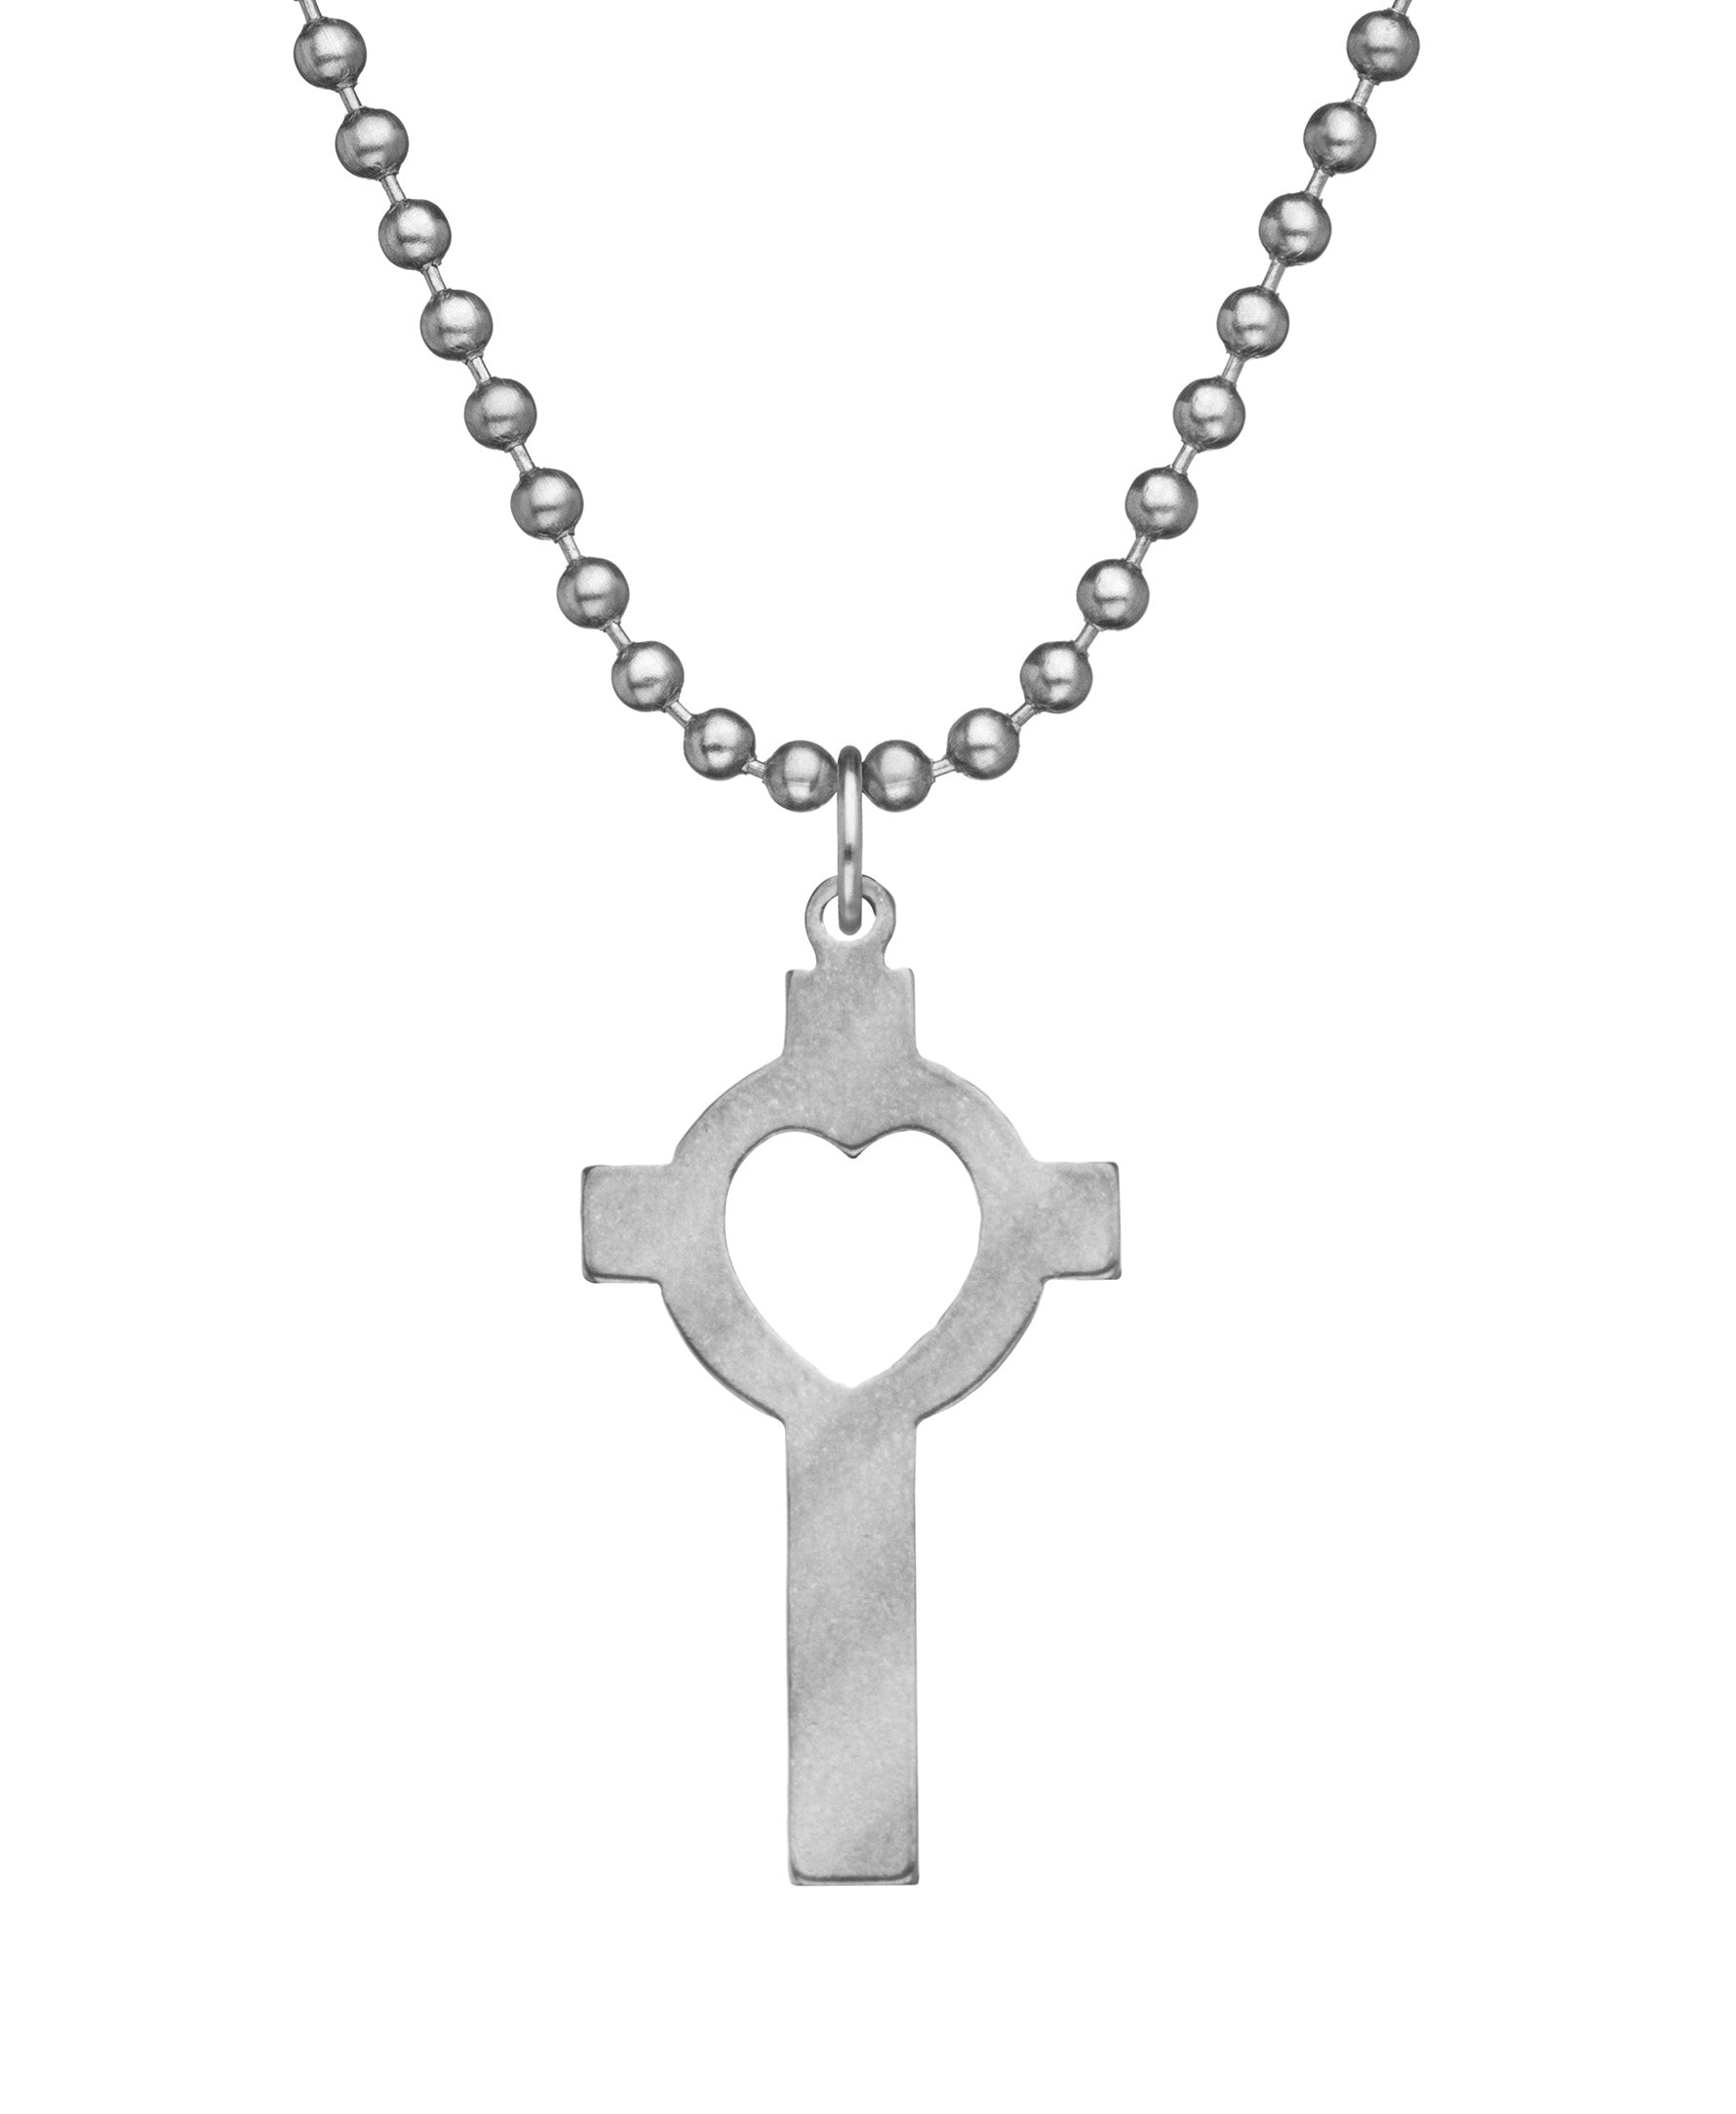 Genuine U.S. Military Issue Lutheran Cross Necklace with Dog Tag Chain